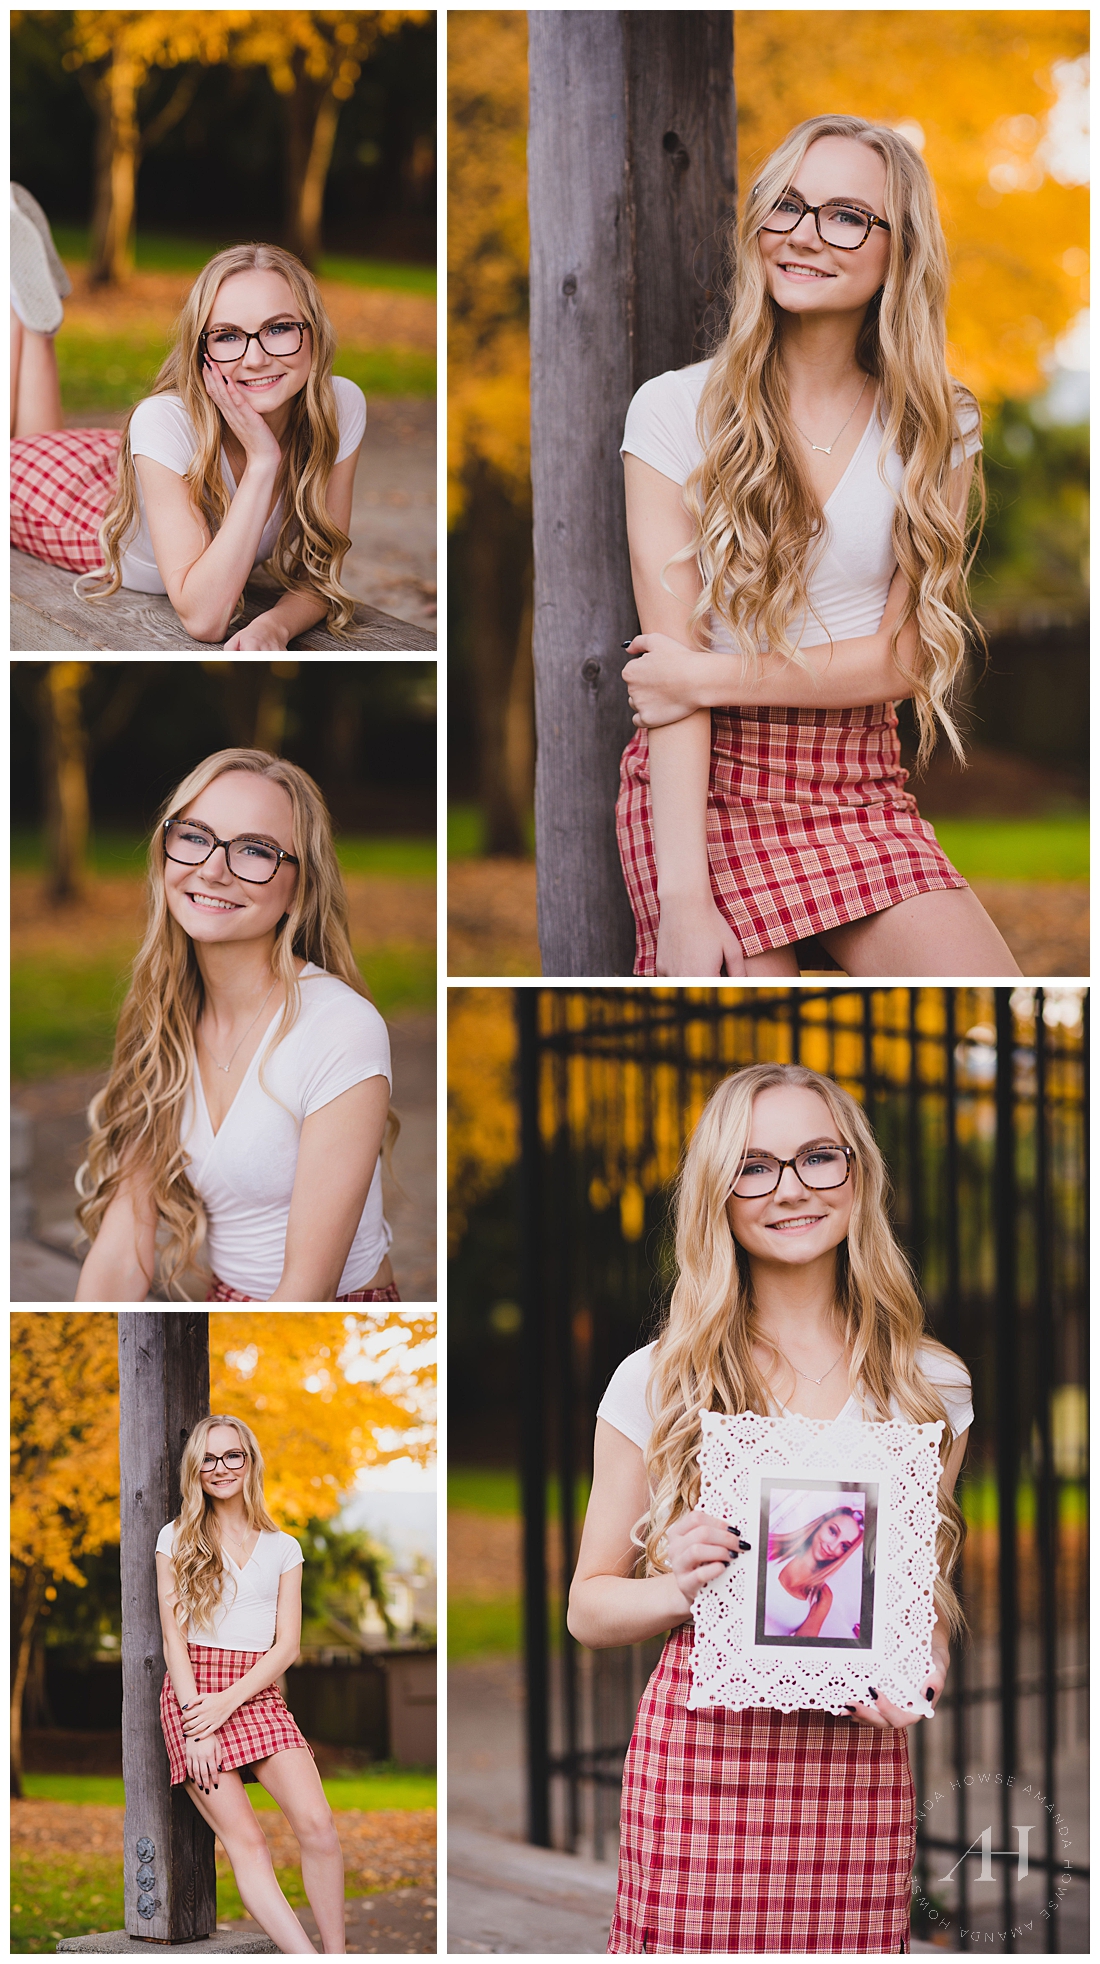 Casual Senior Portraits in October Photographed by Amanda Howse